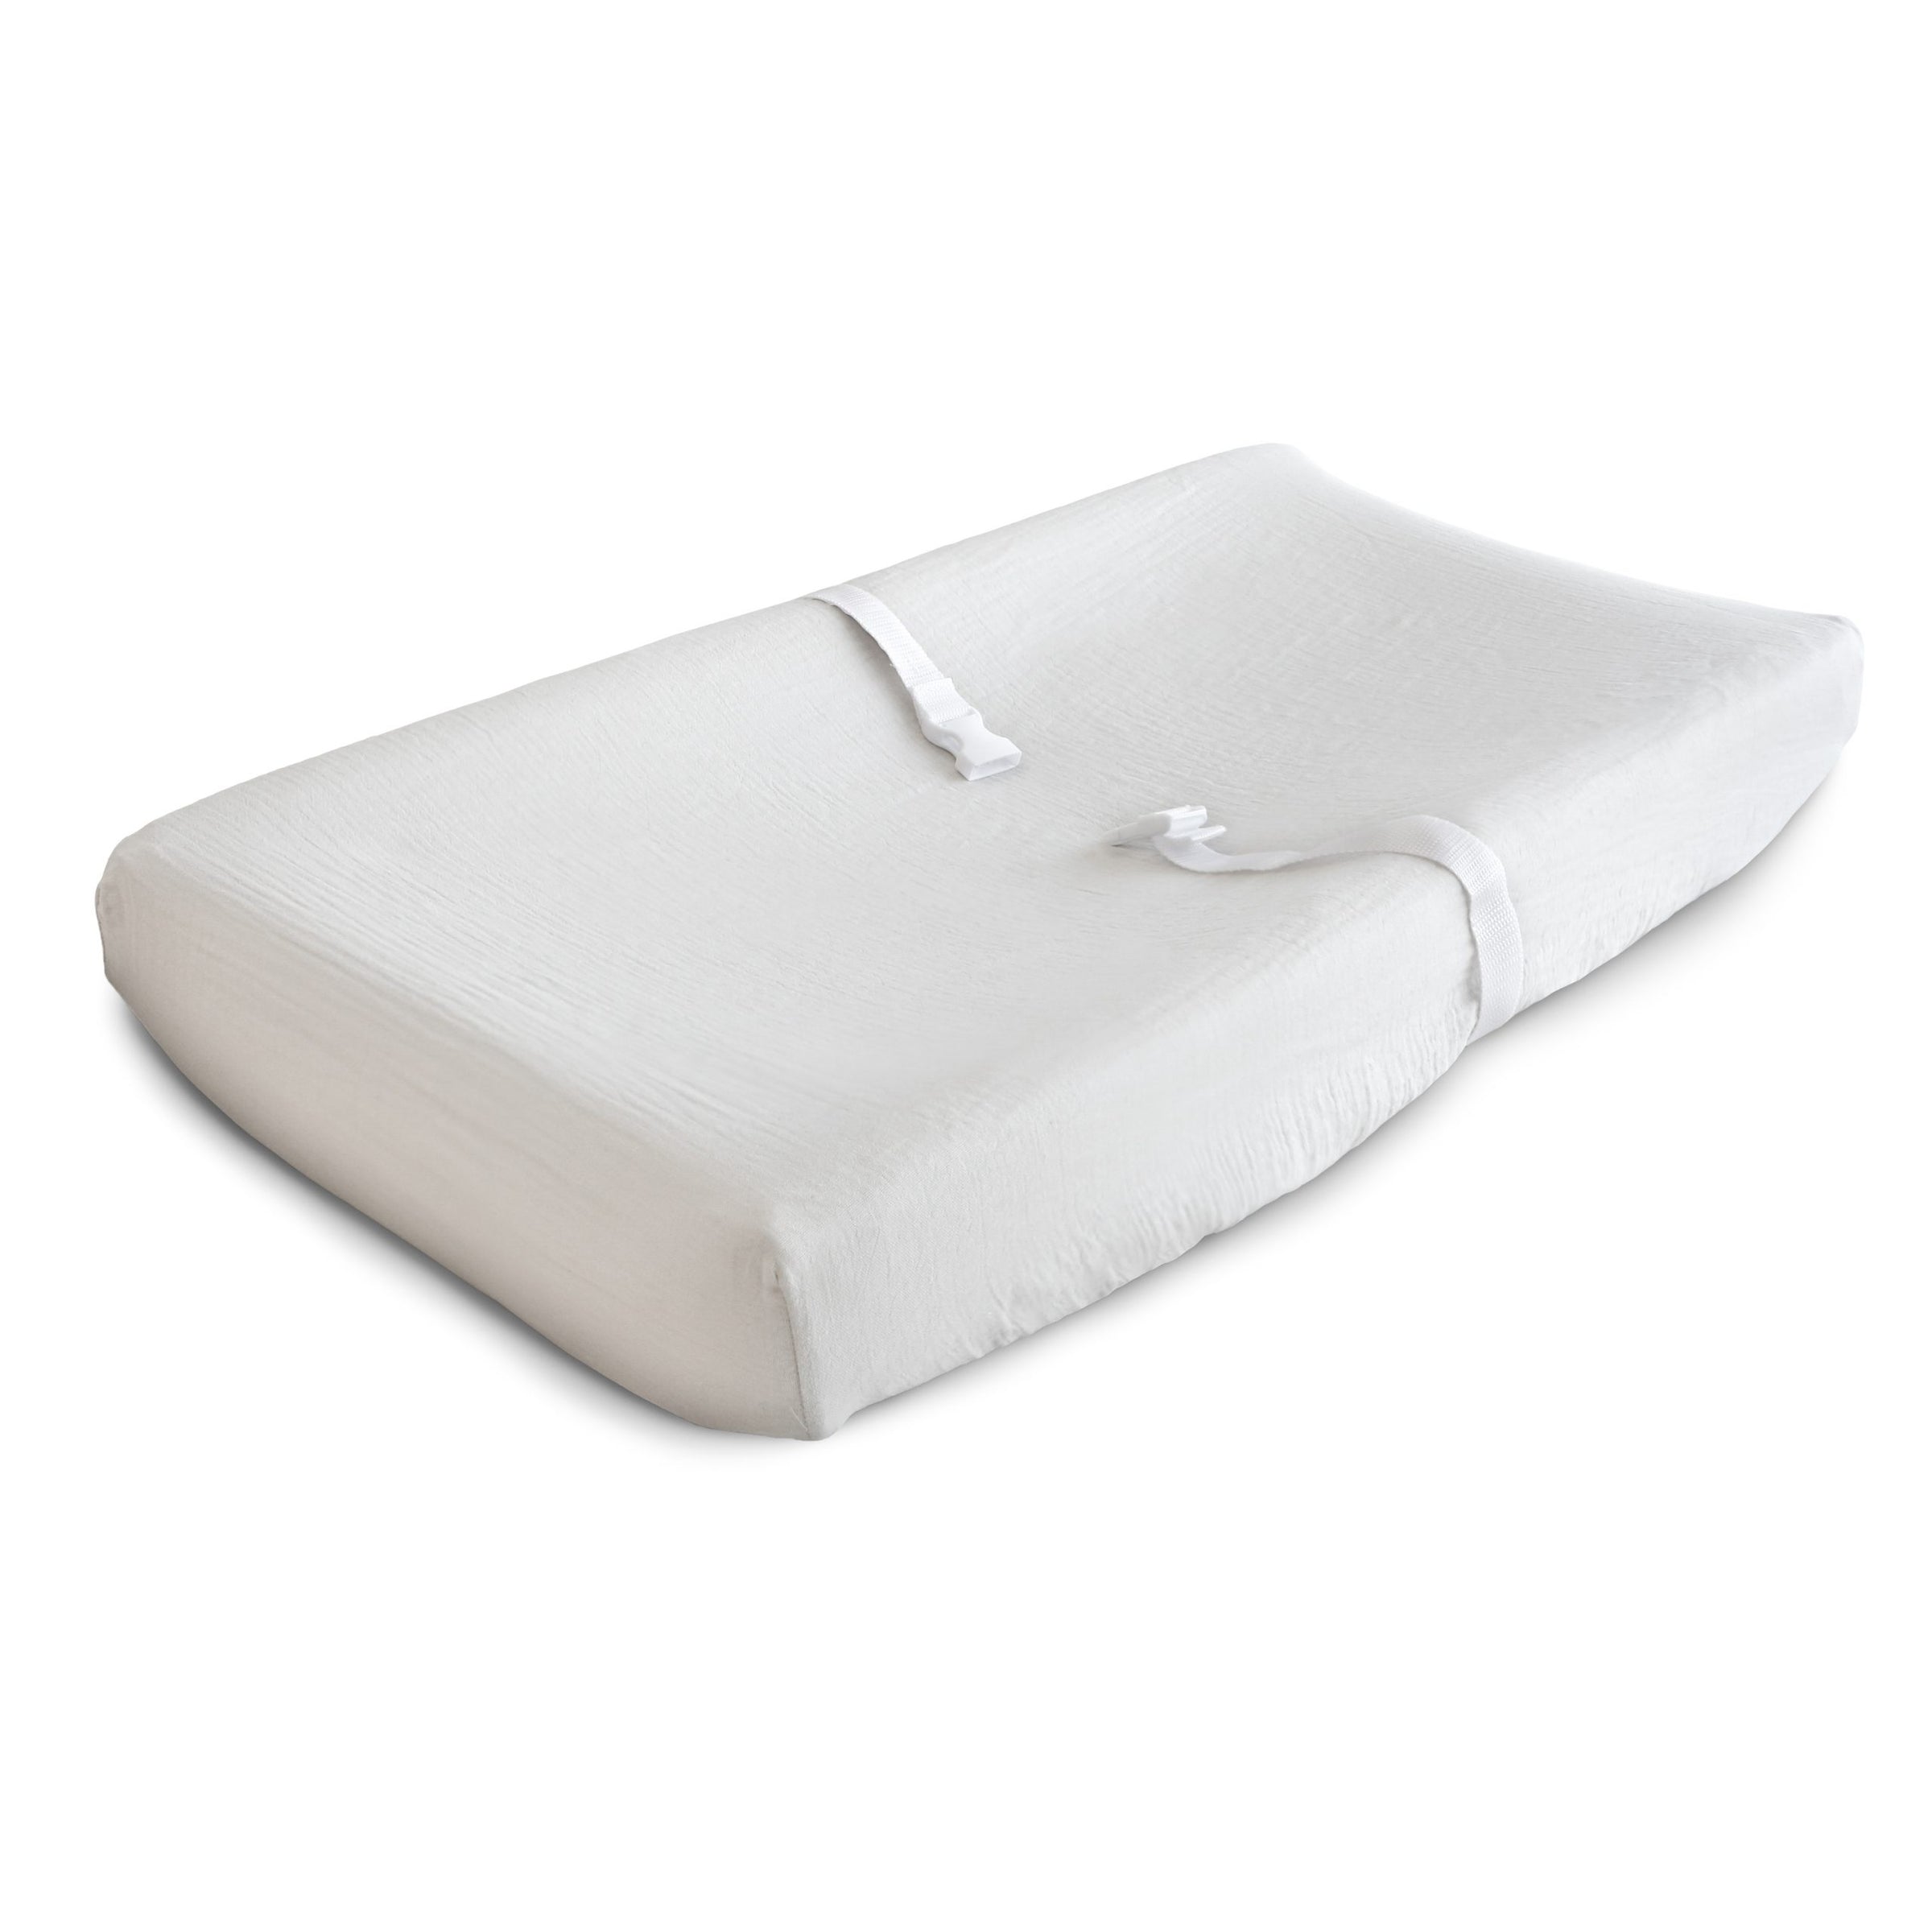 Muslin Changing Pad Cover - White